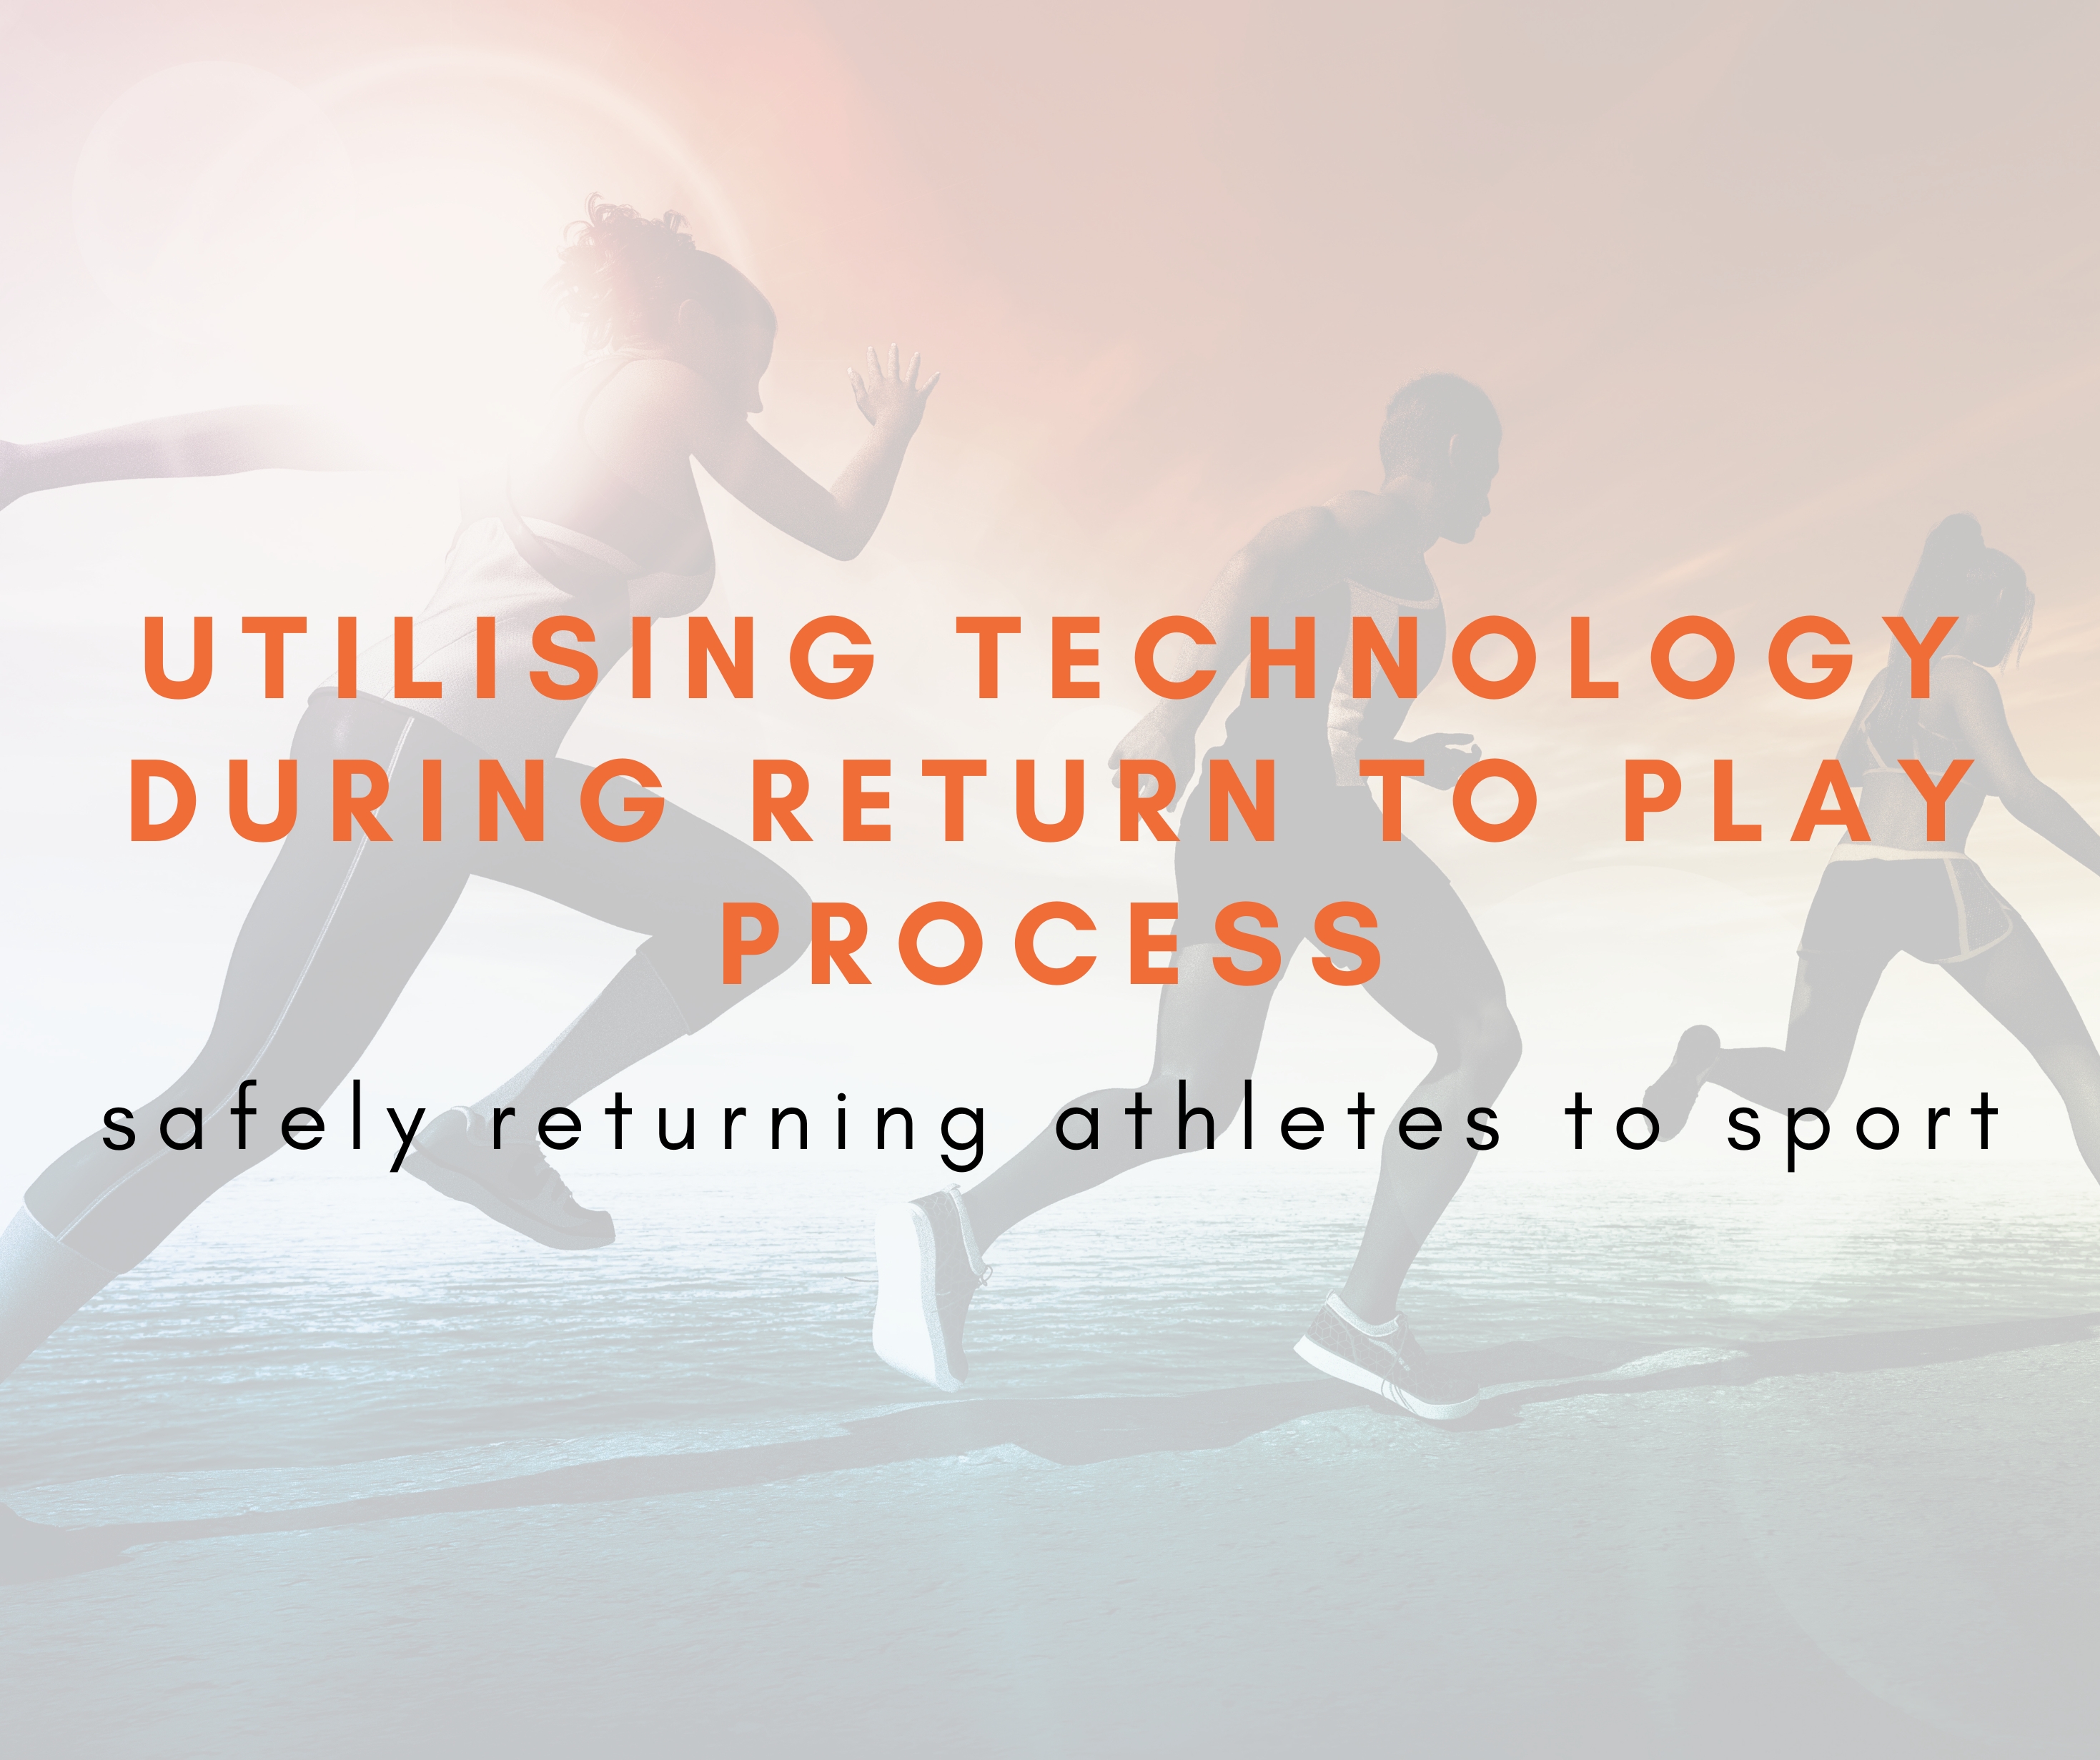 Utilising technology during return to play process to safely return athletes to sport